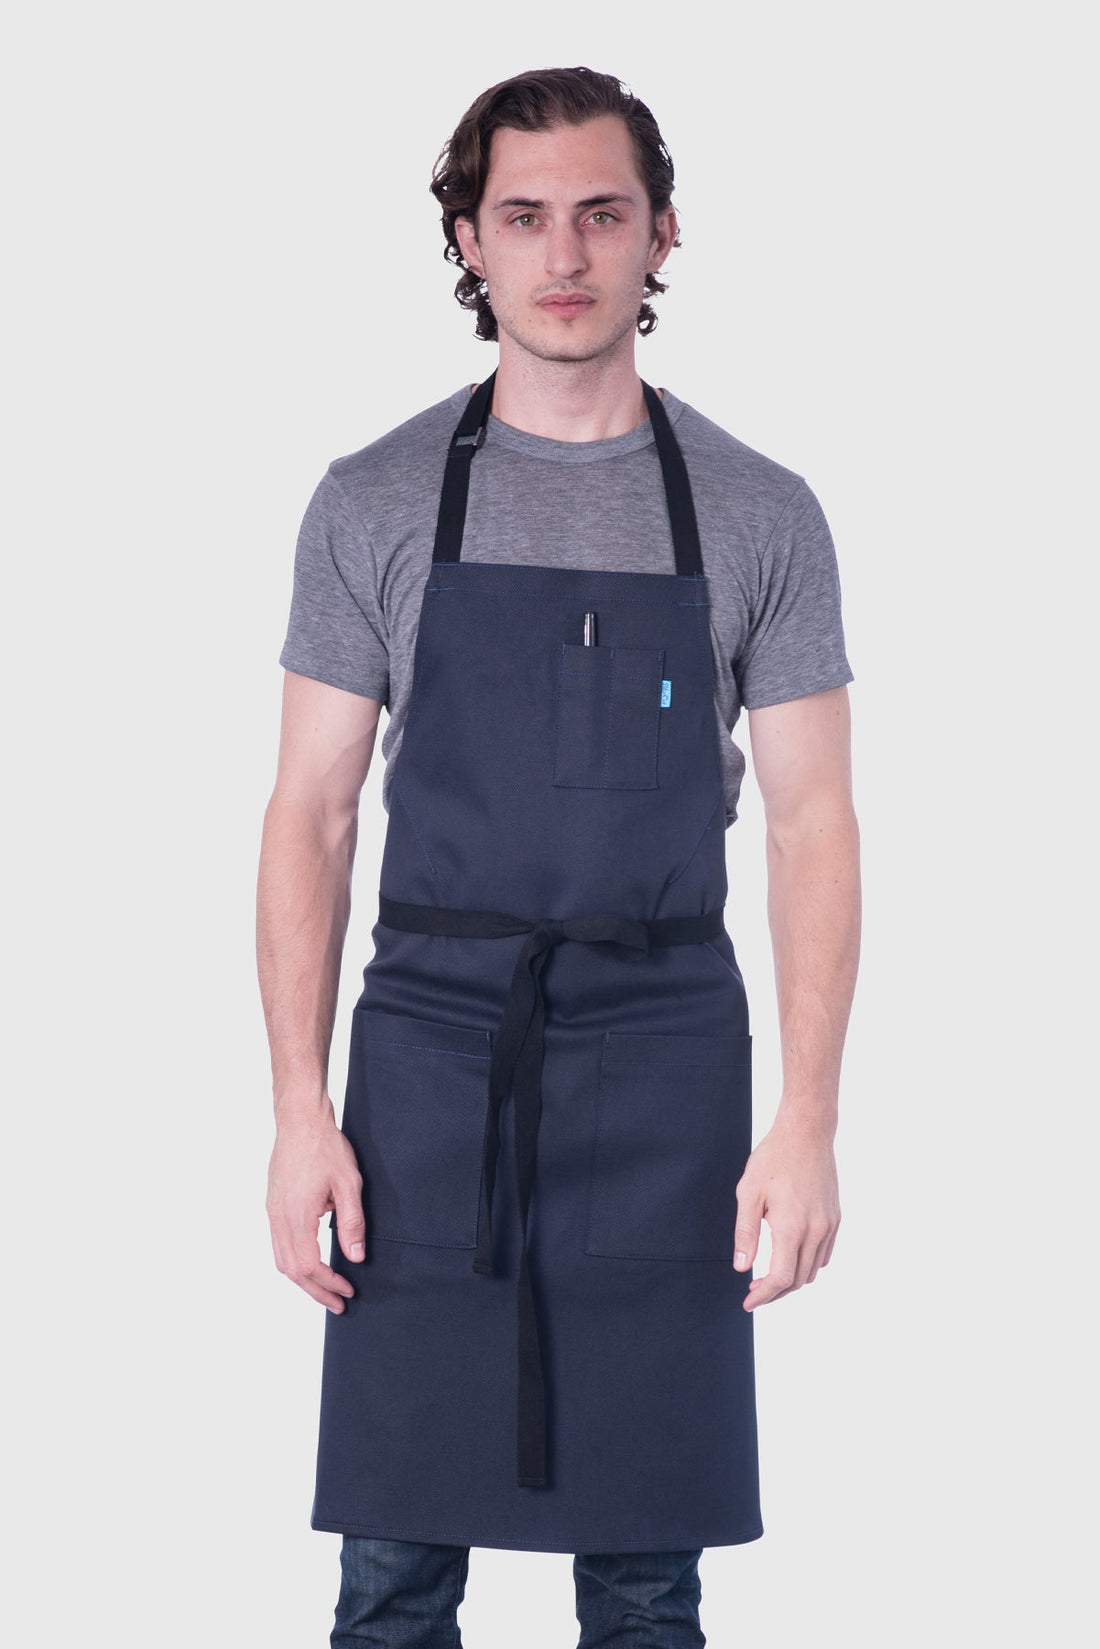 Image of person wearing Line Apron in Poly Cotton Twill. | BlueCut Aprons				